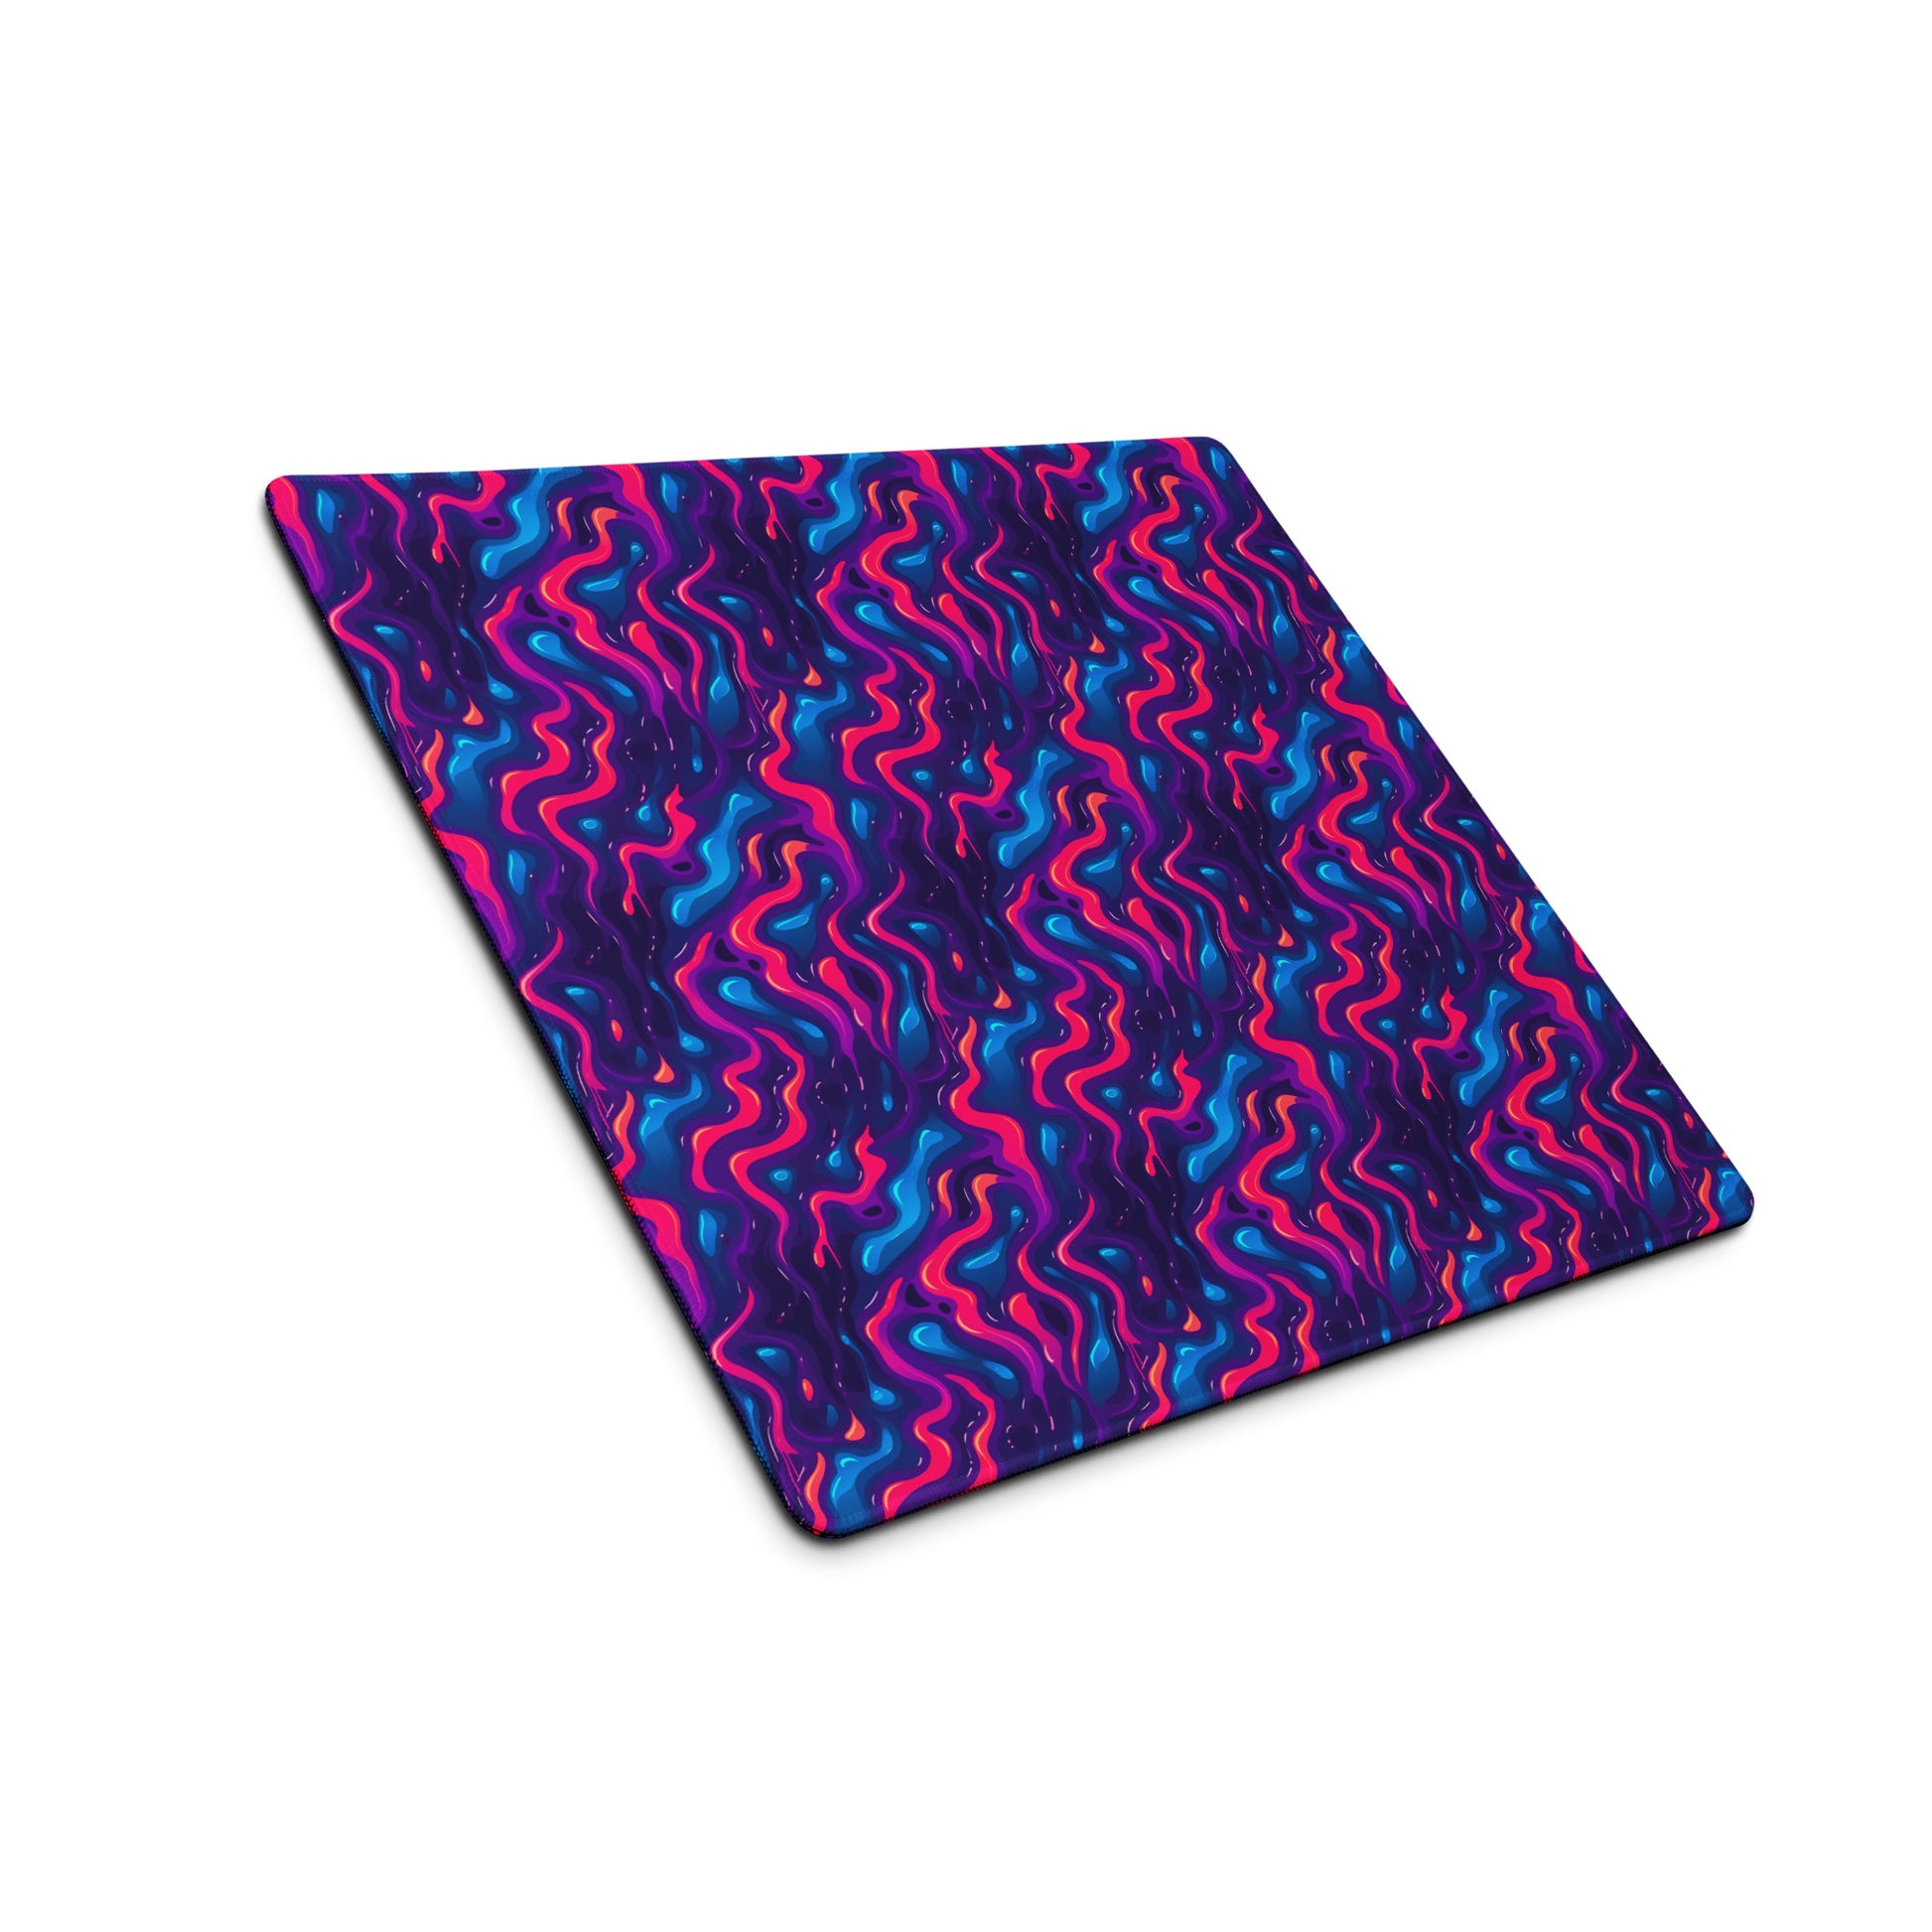 A 18" x 16" desk pad with a pink, blue and purple wavy pattern sitting at an angle.